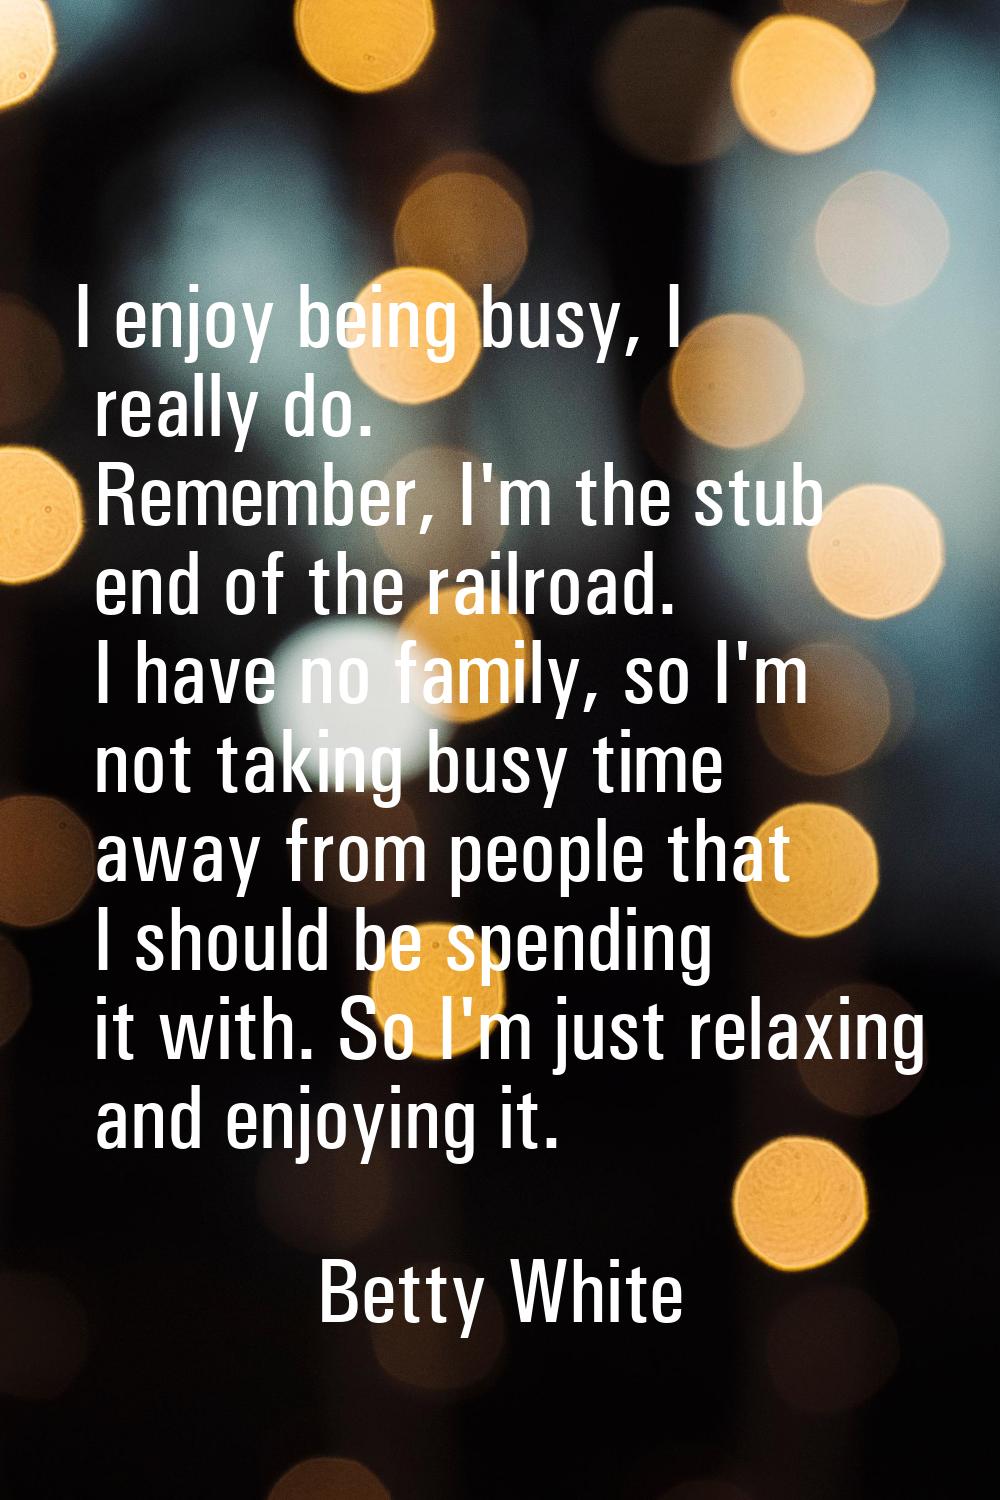 I enjoy being busy, I really do. Remember, I'm the stub end of the railroad. I have no family, so I